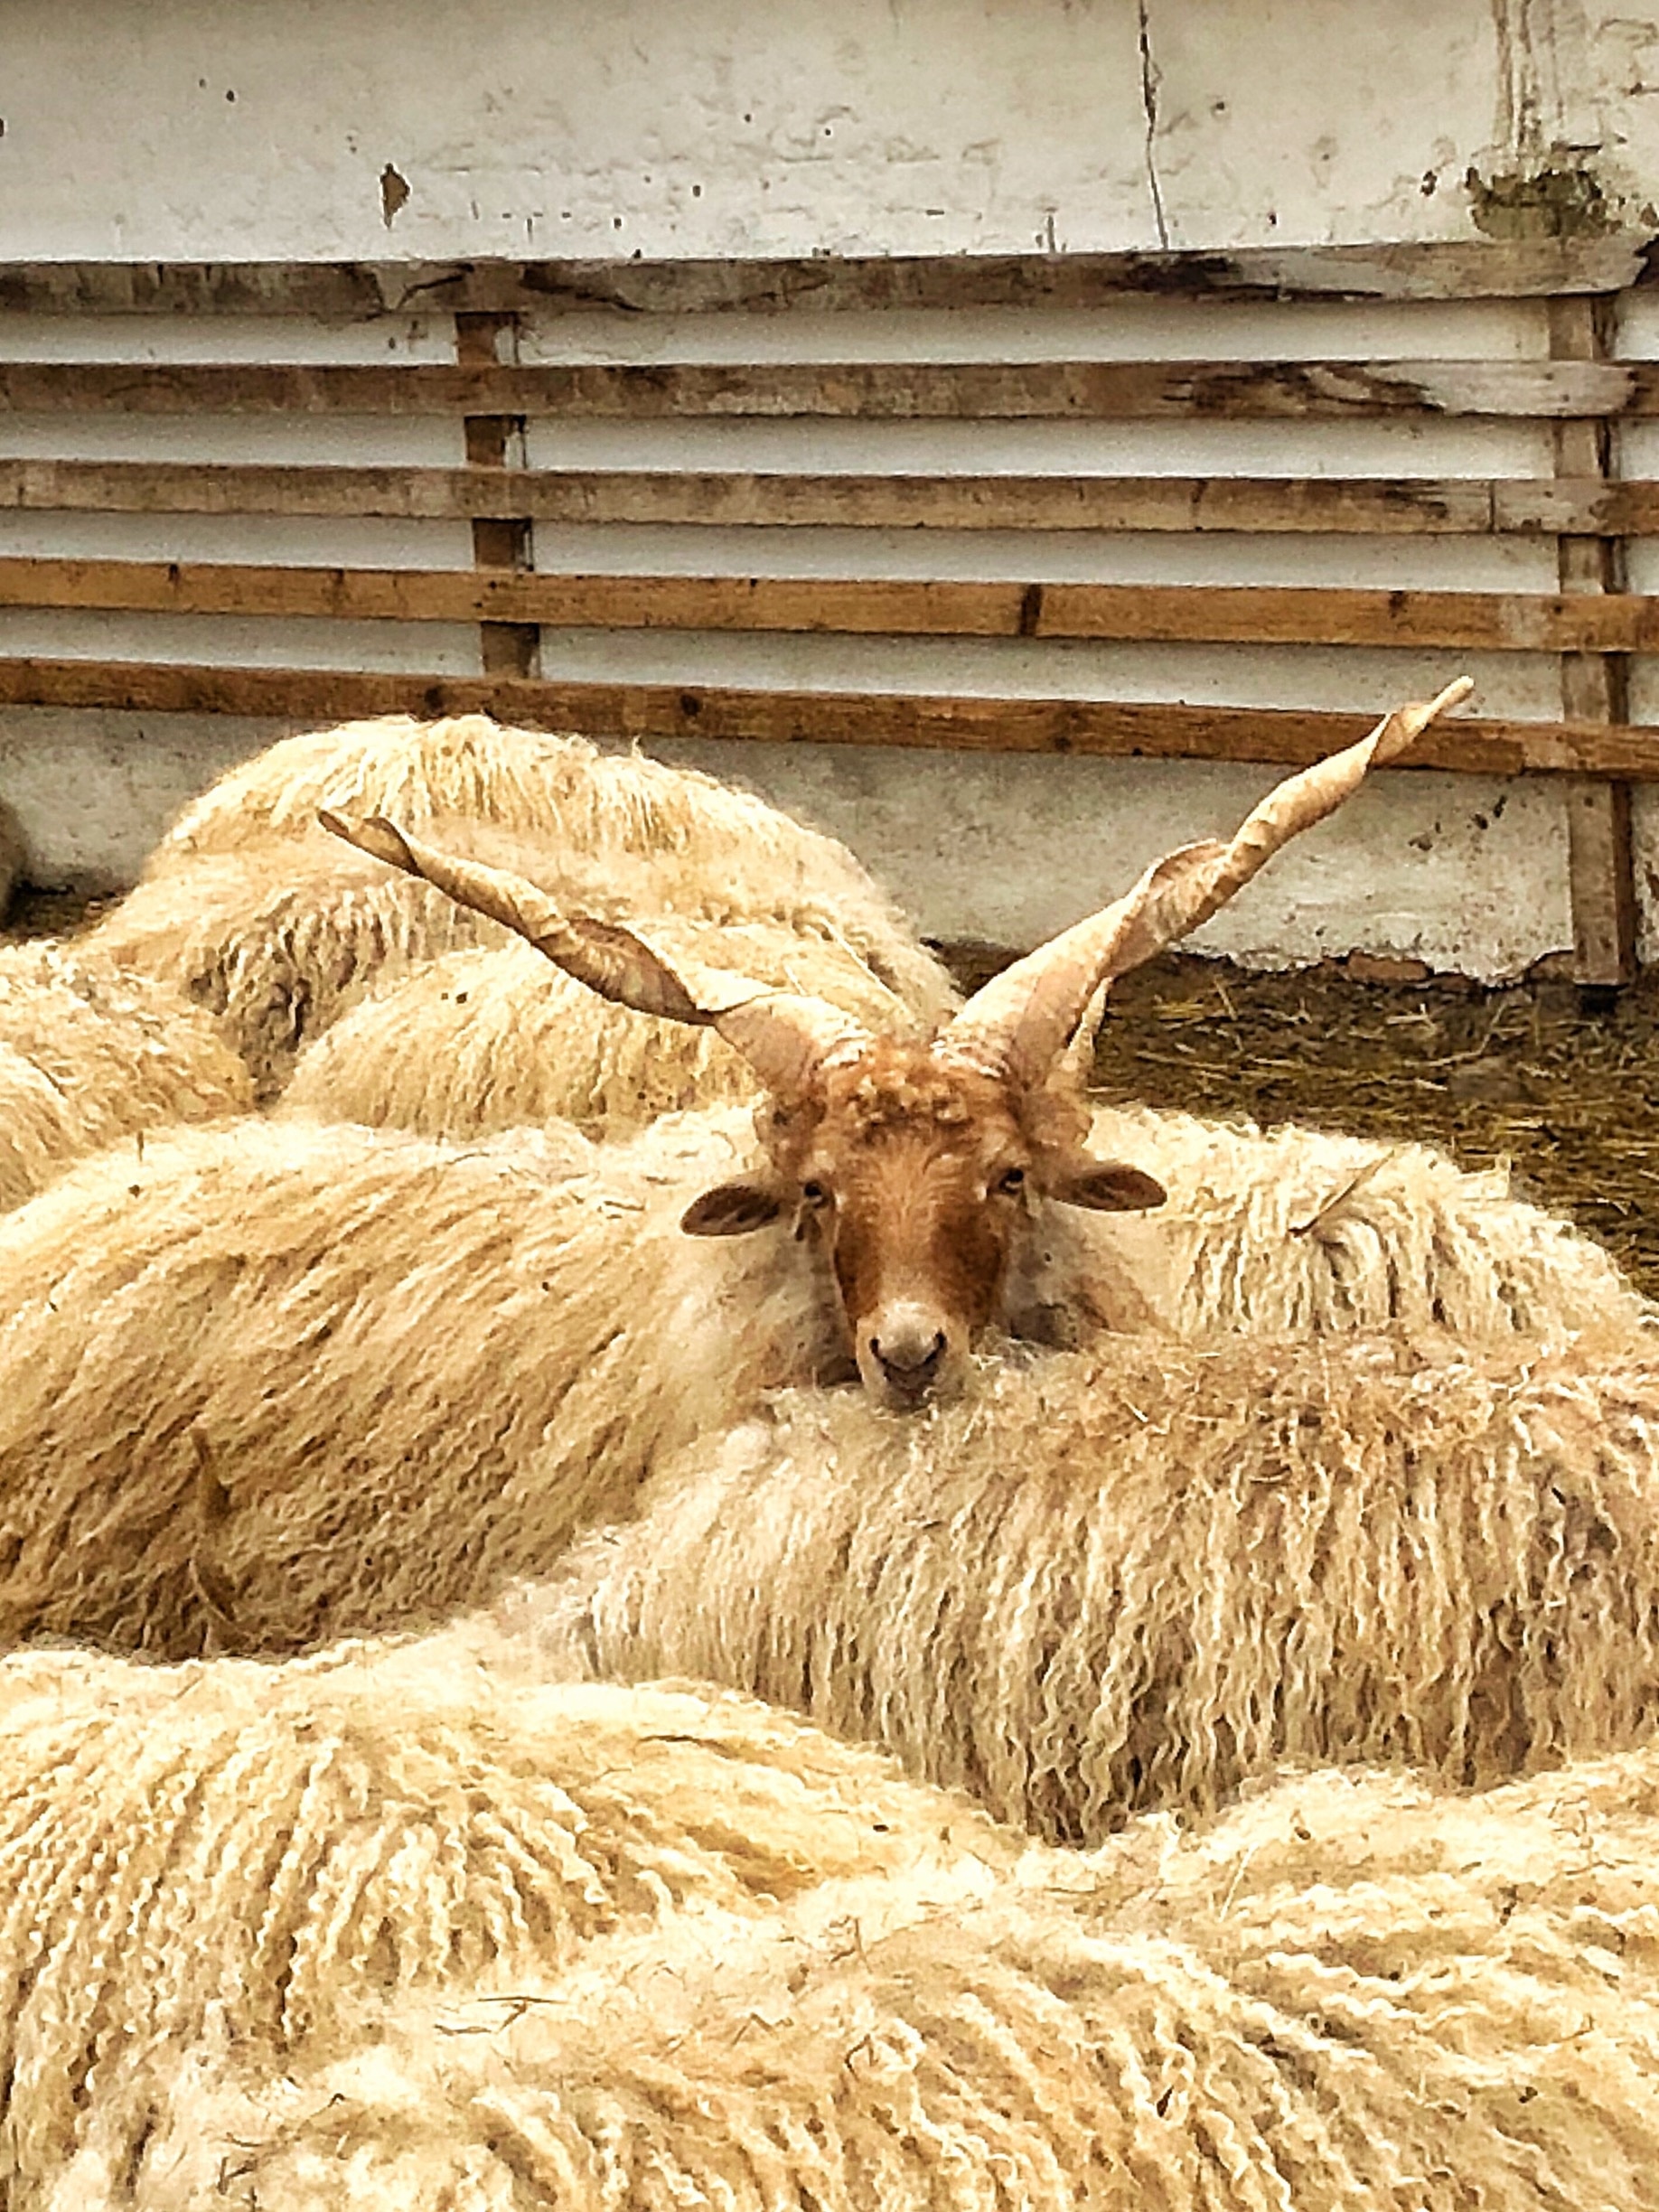 Hungarian Racka sheep in the lovely open air museum outside of Szentendre, Hungary.